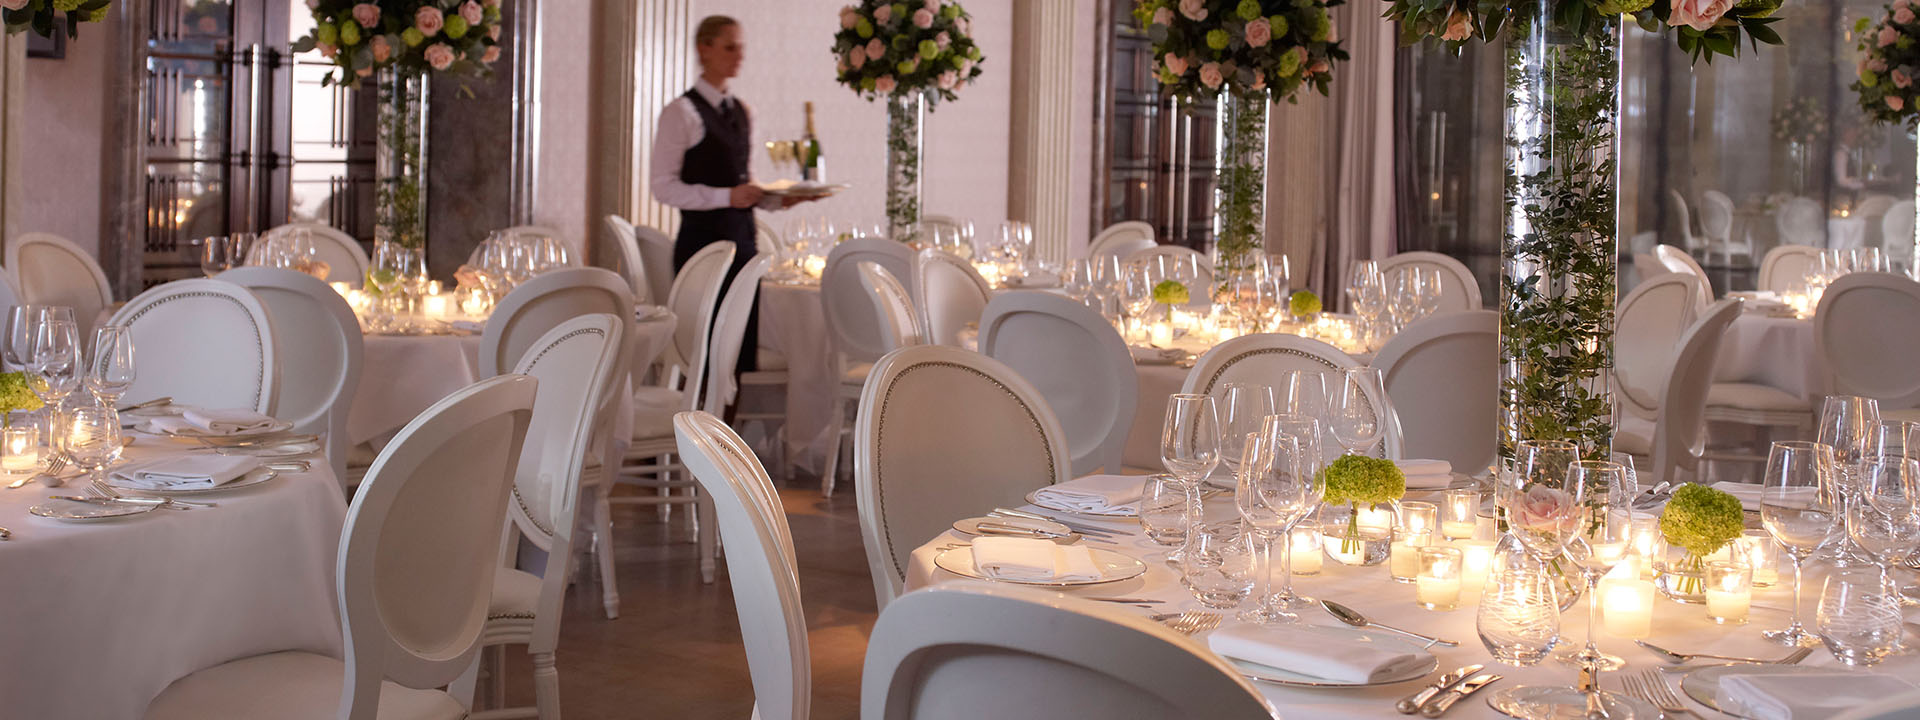 Weddings at The Connaught